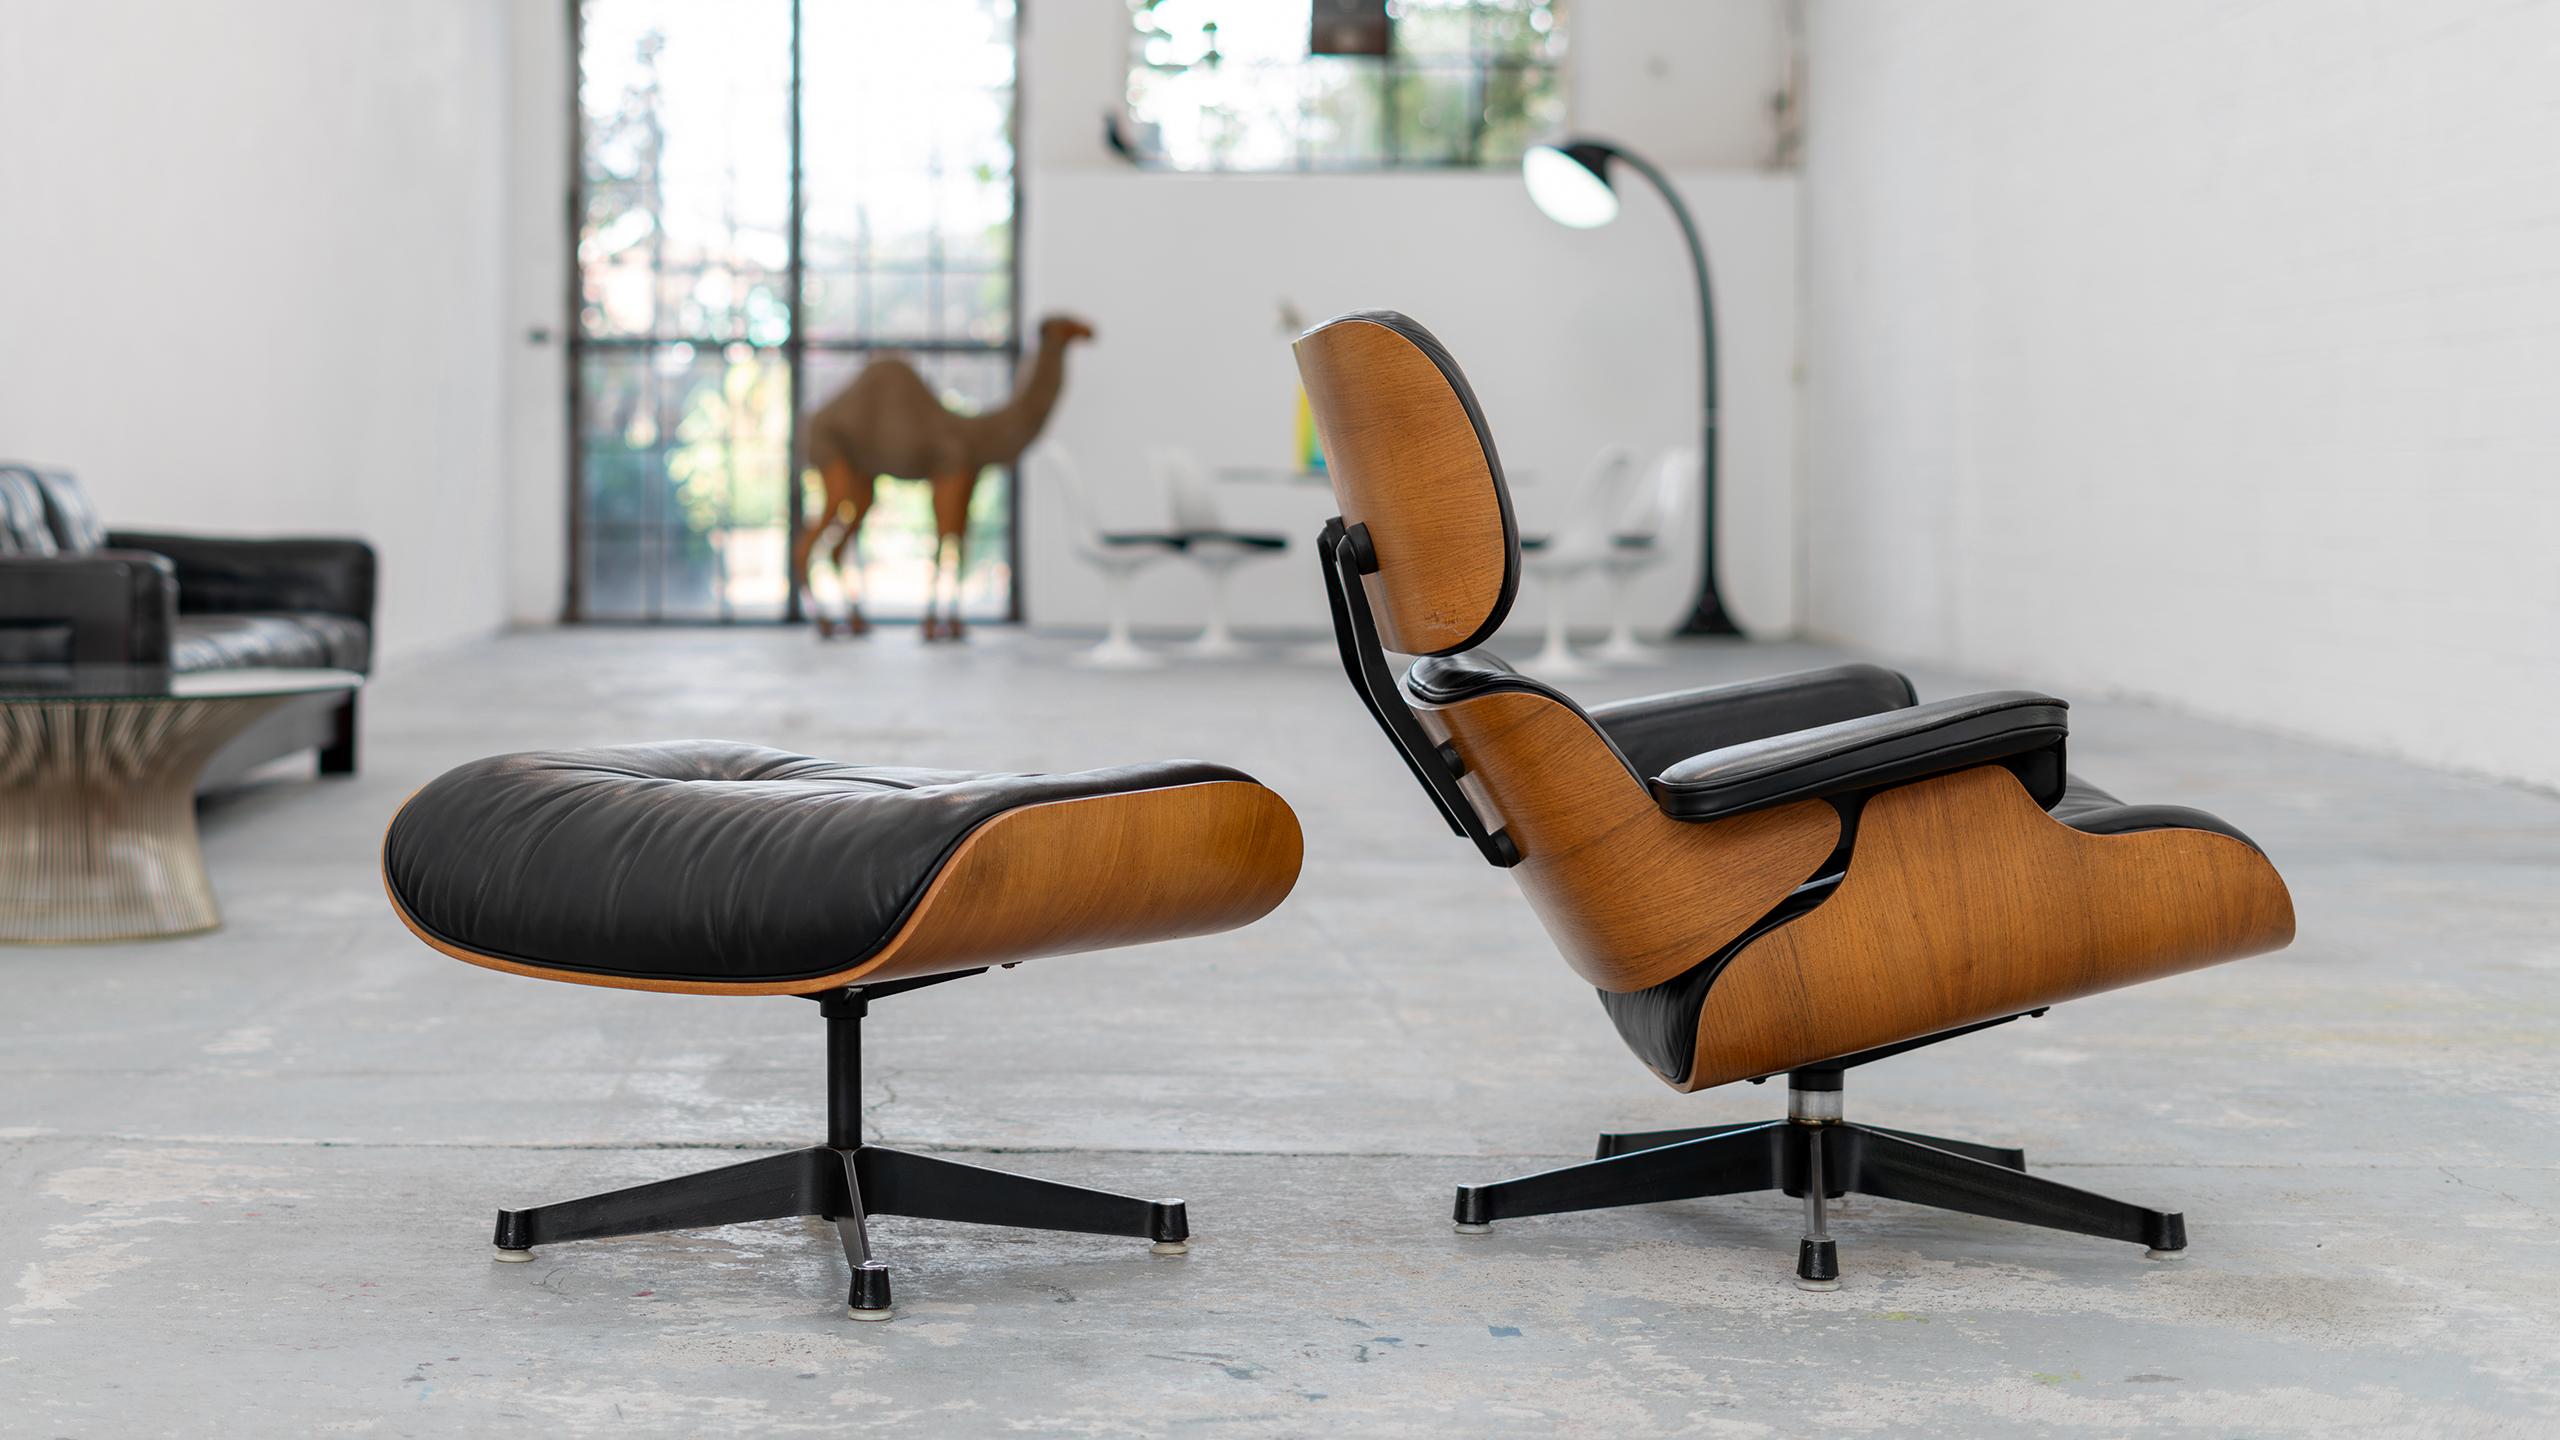 Charles & Ray Eames - Lounge Chair, 1957 by Fehlbaum & Contura - 1st Series 6